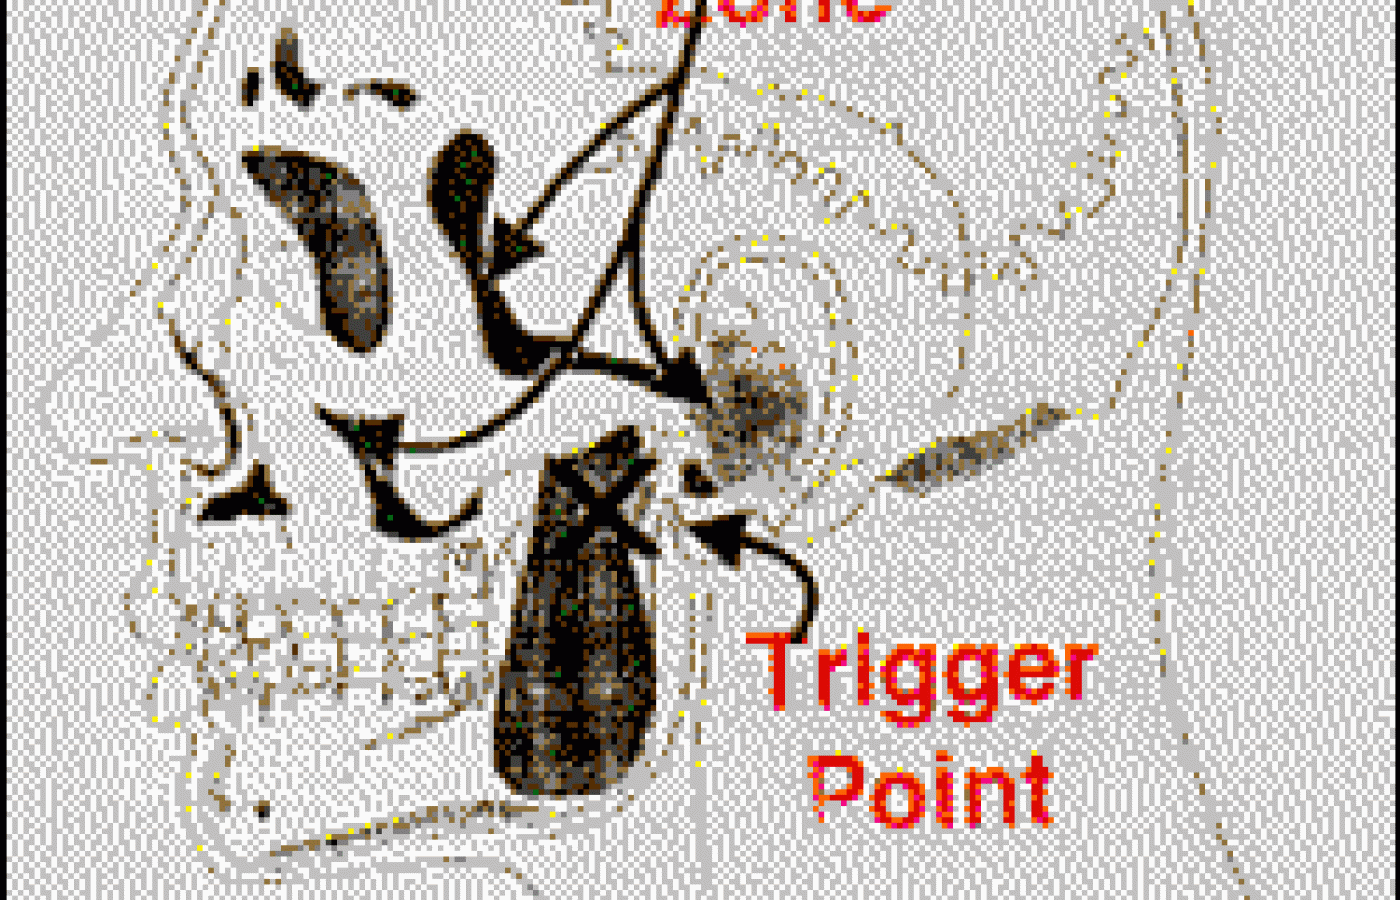 Referral Zone and Trigger Point Diagram